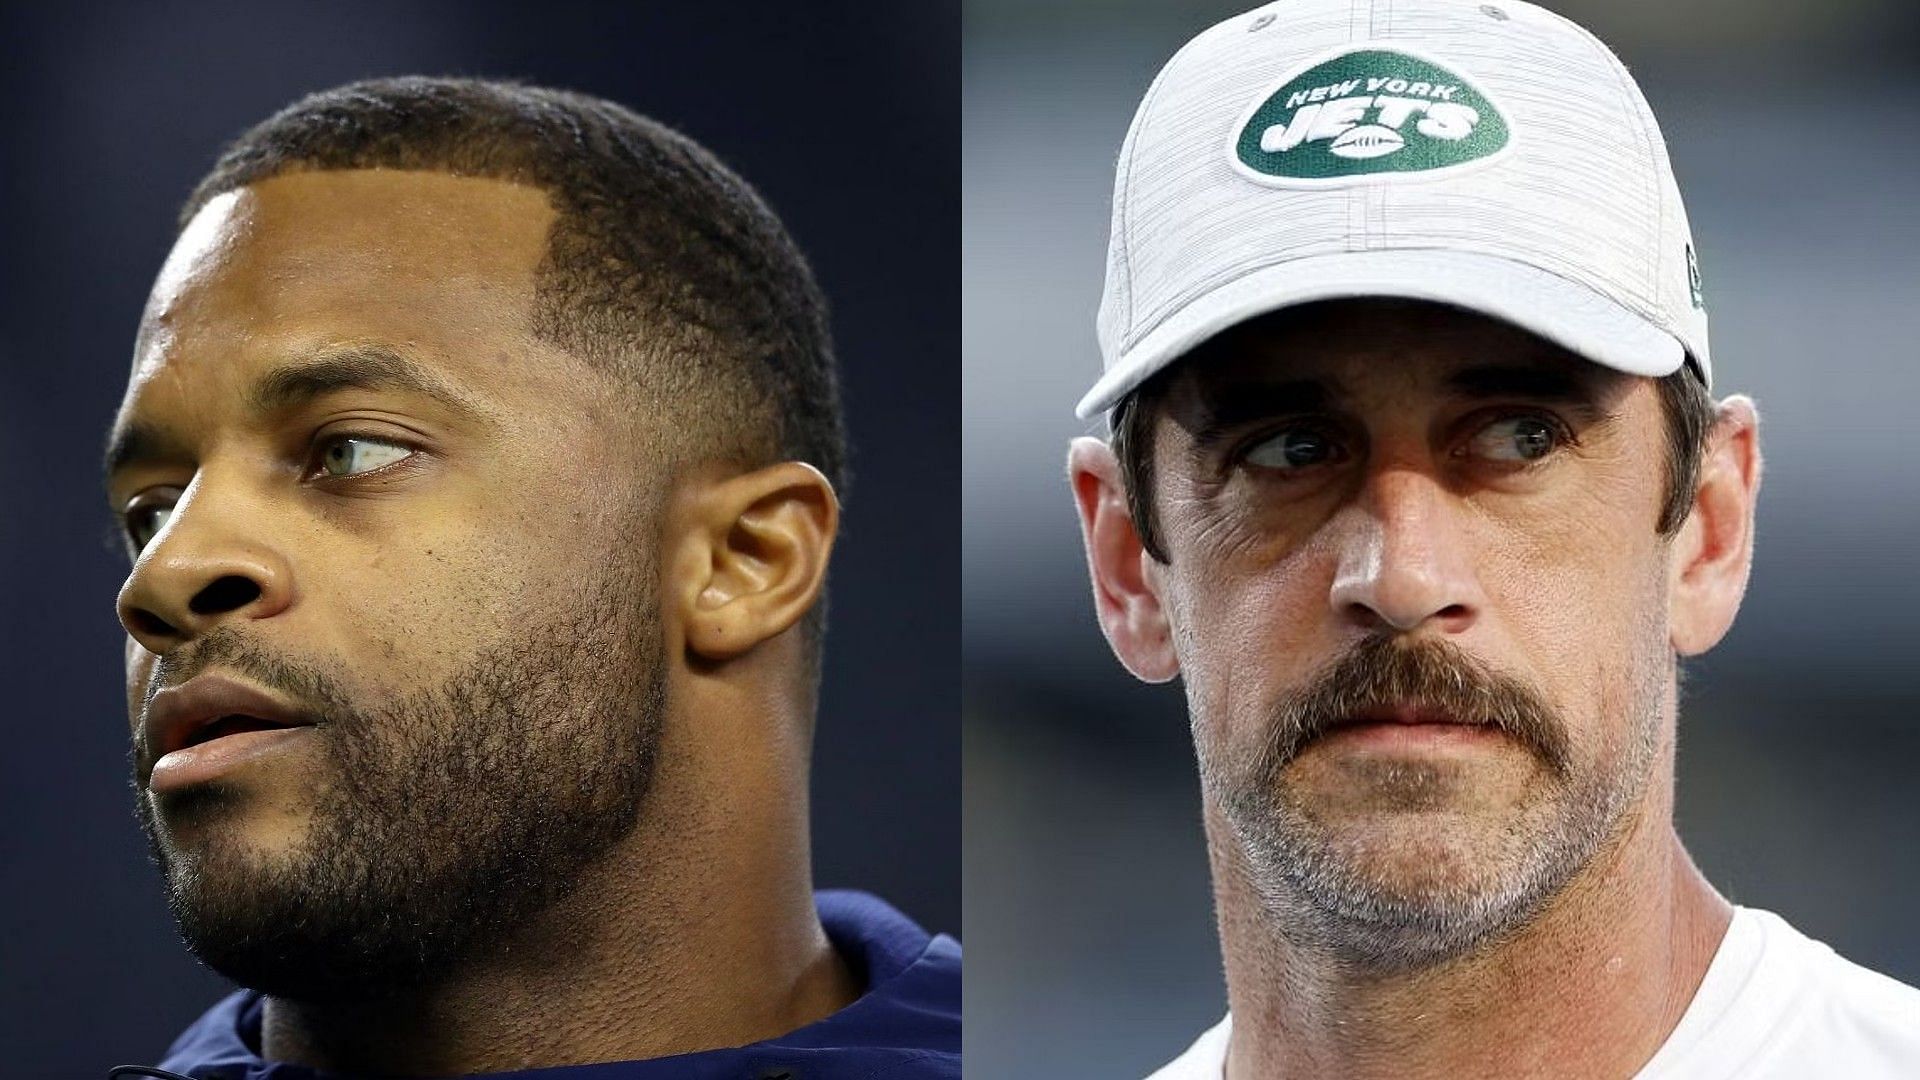 Aaron Rodgers teetering on blowup, Randall Cobb claims